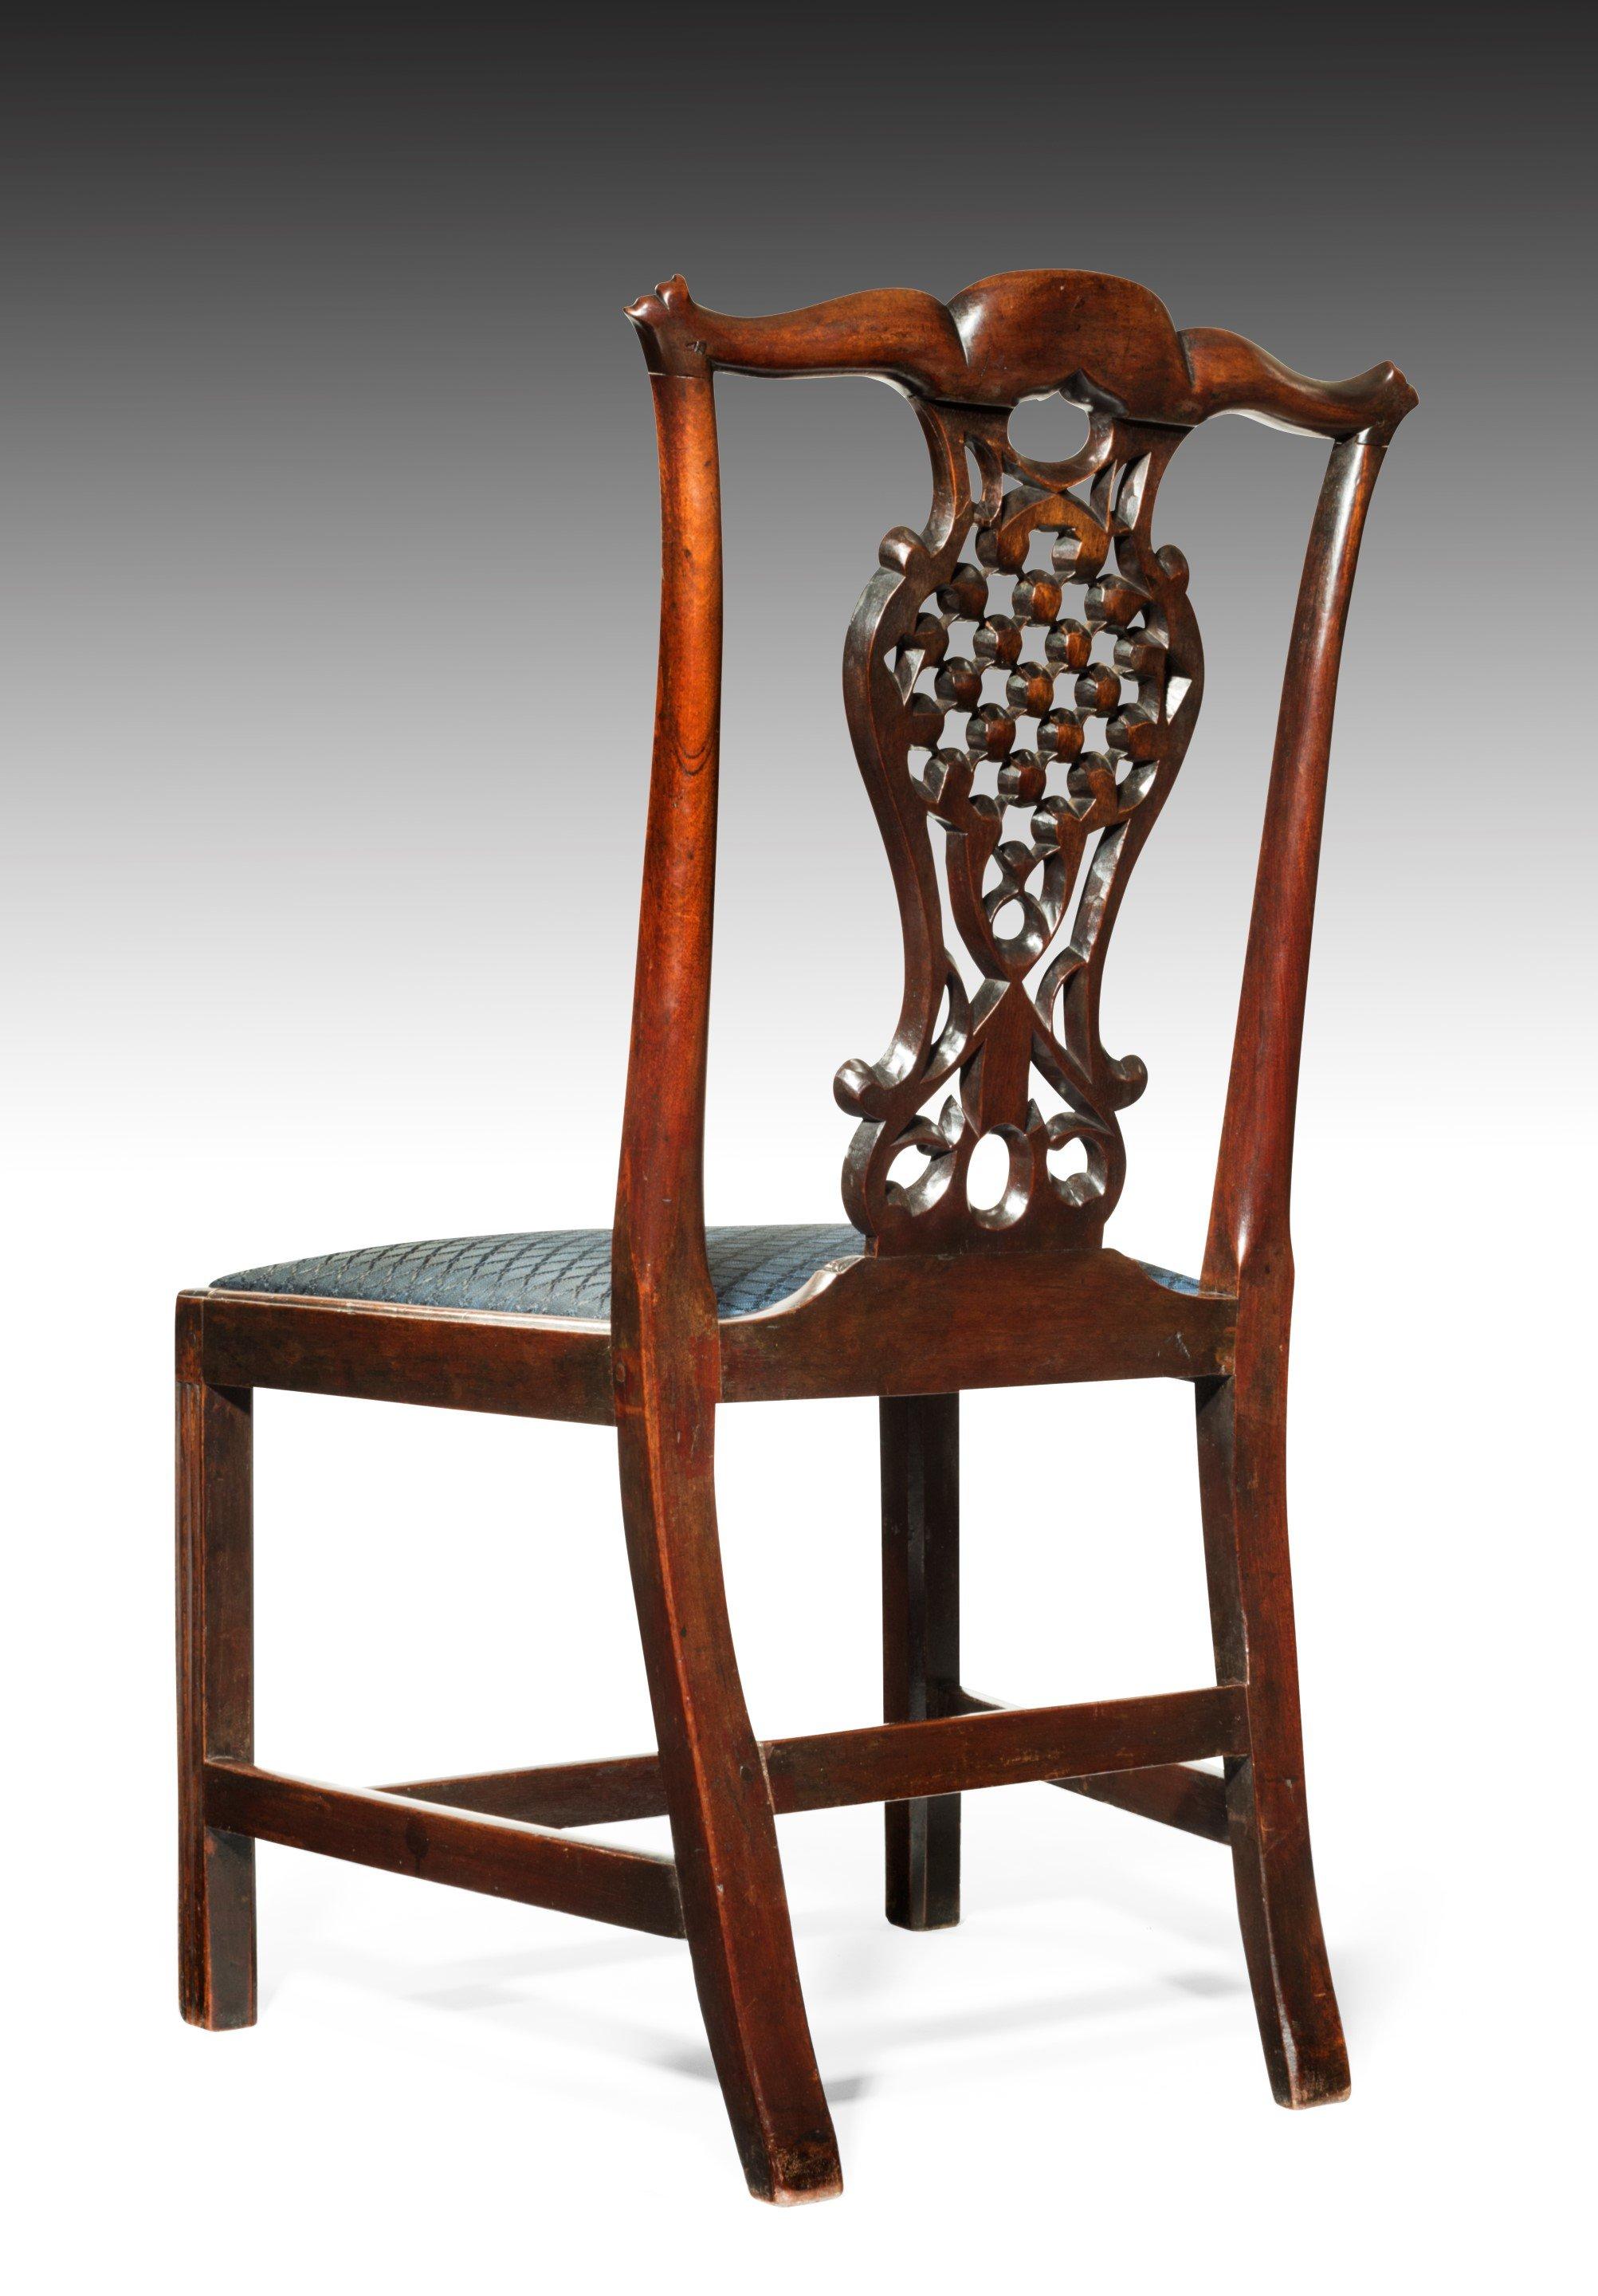 An exceptional pair of rare George III period mahogany side chairs, with a Chinese lattice back splat, after the designs of Robert Mainwaring. The carving is well drawn and finely executed, with the back view of the back-splat every bit as